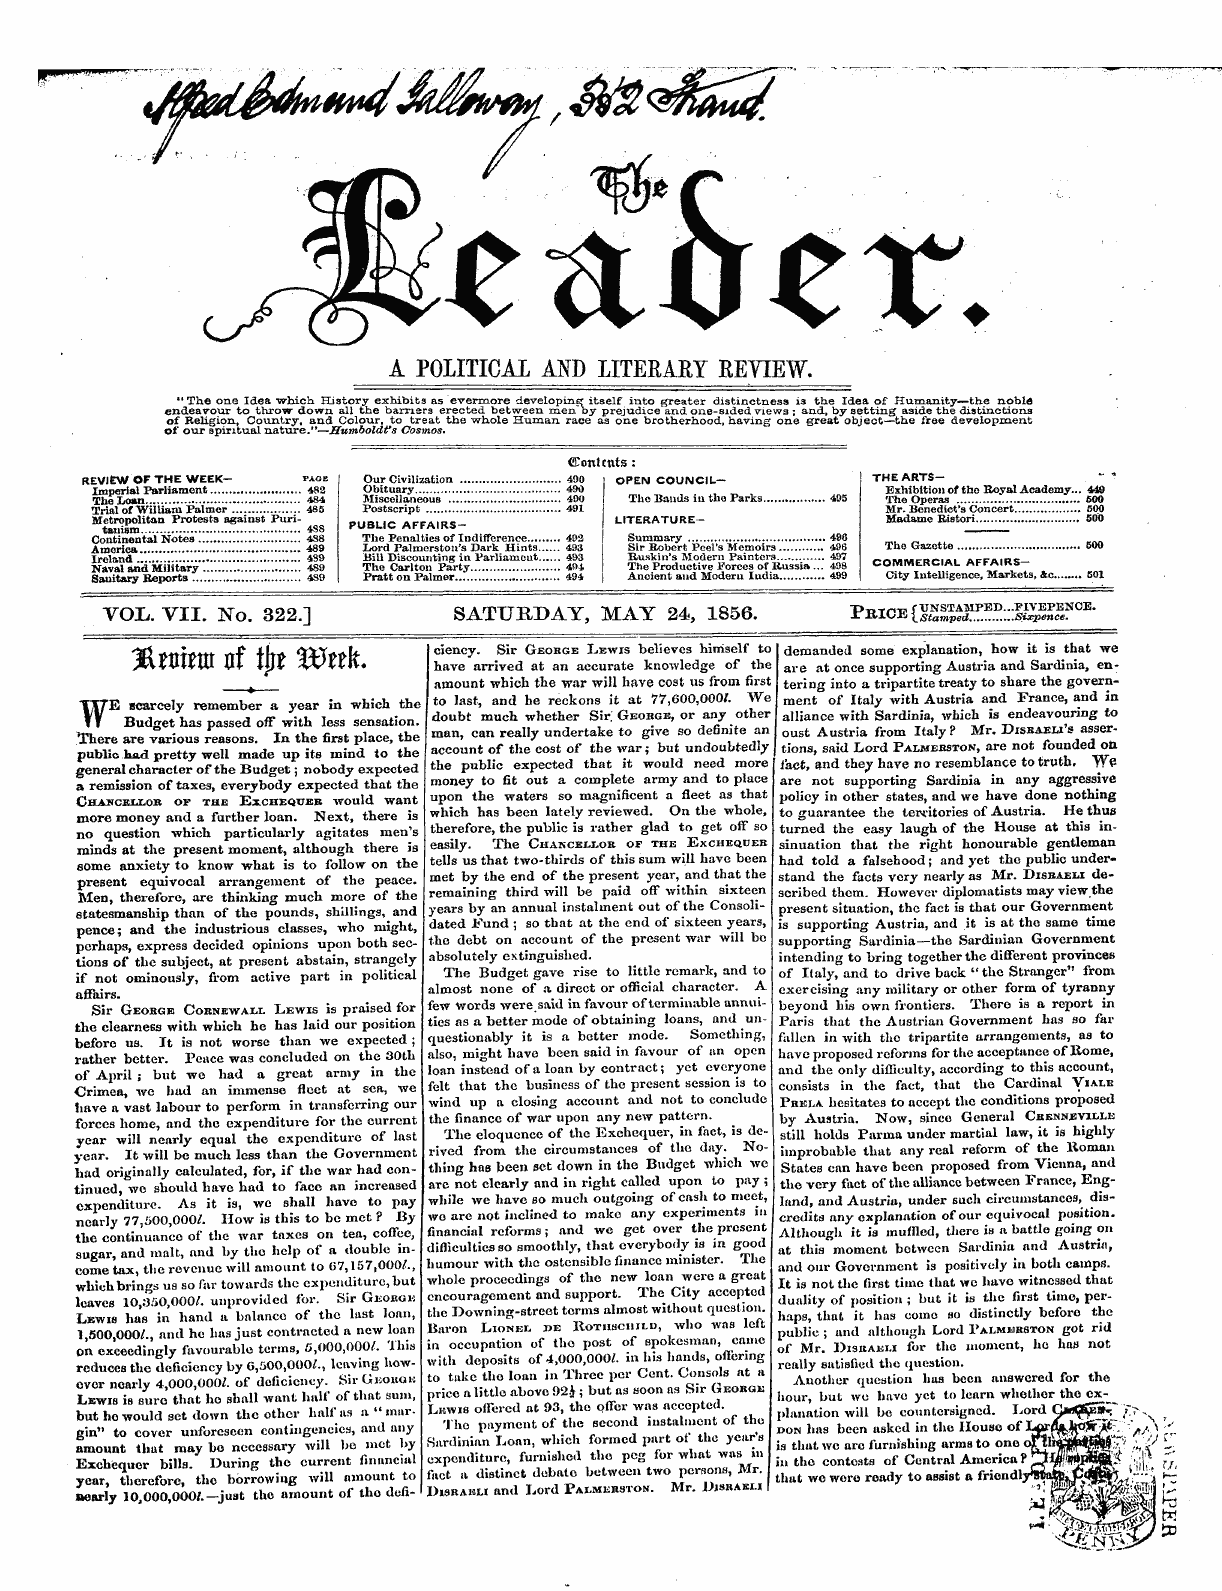 Leader (1850-1860): jS F Y, 1st edition - Untitled Picture